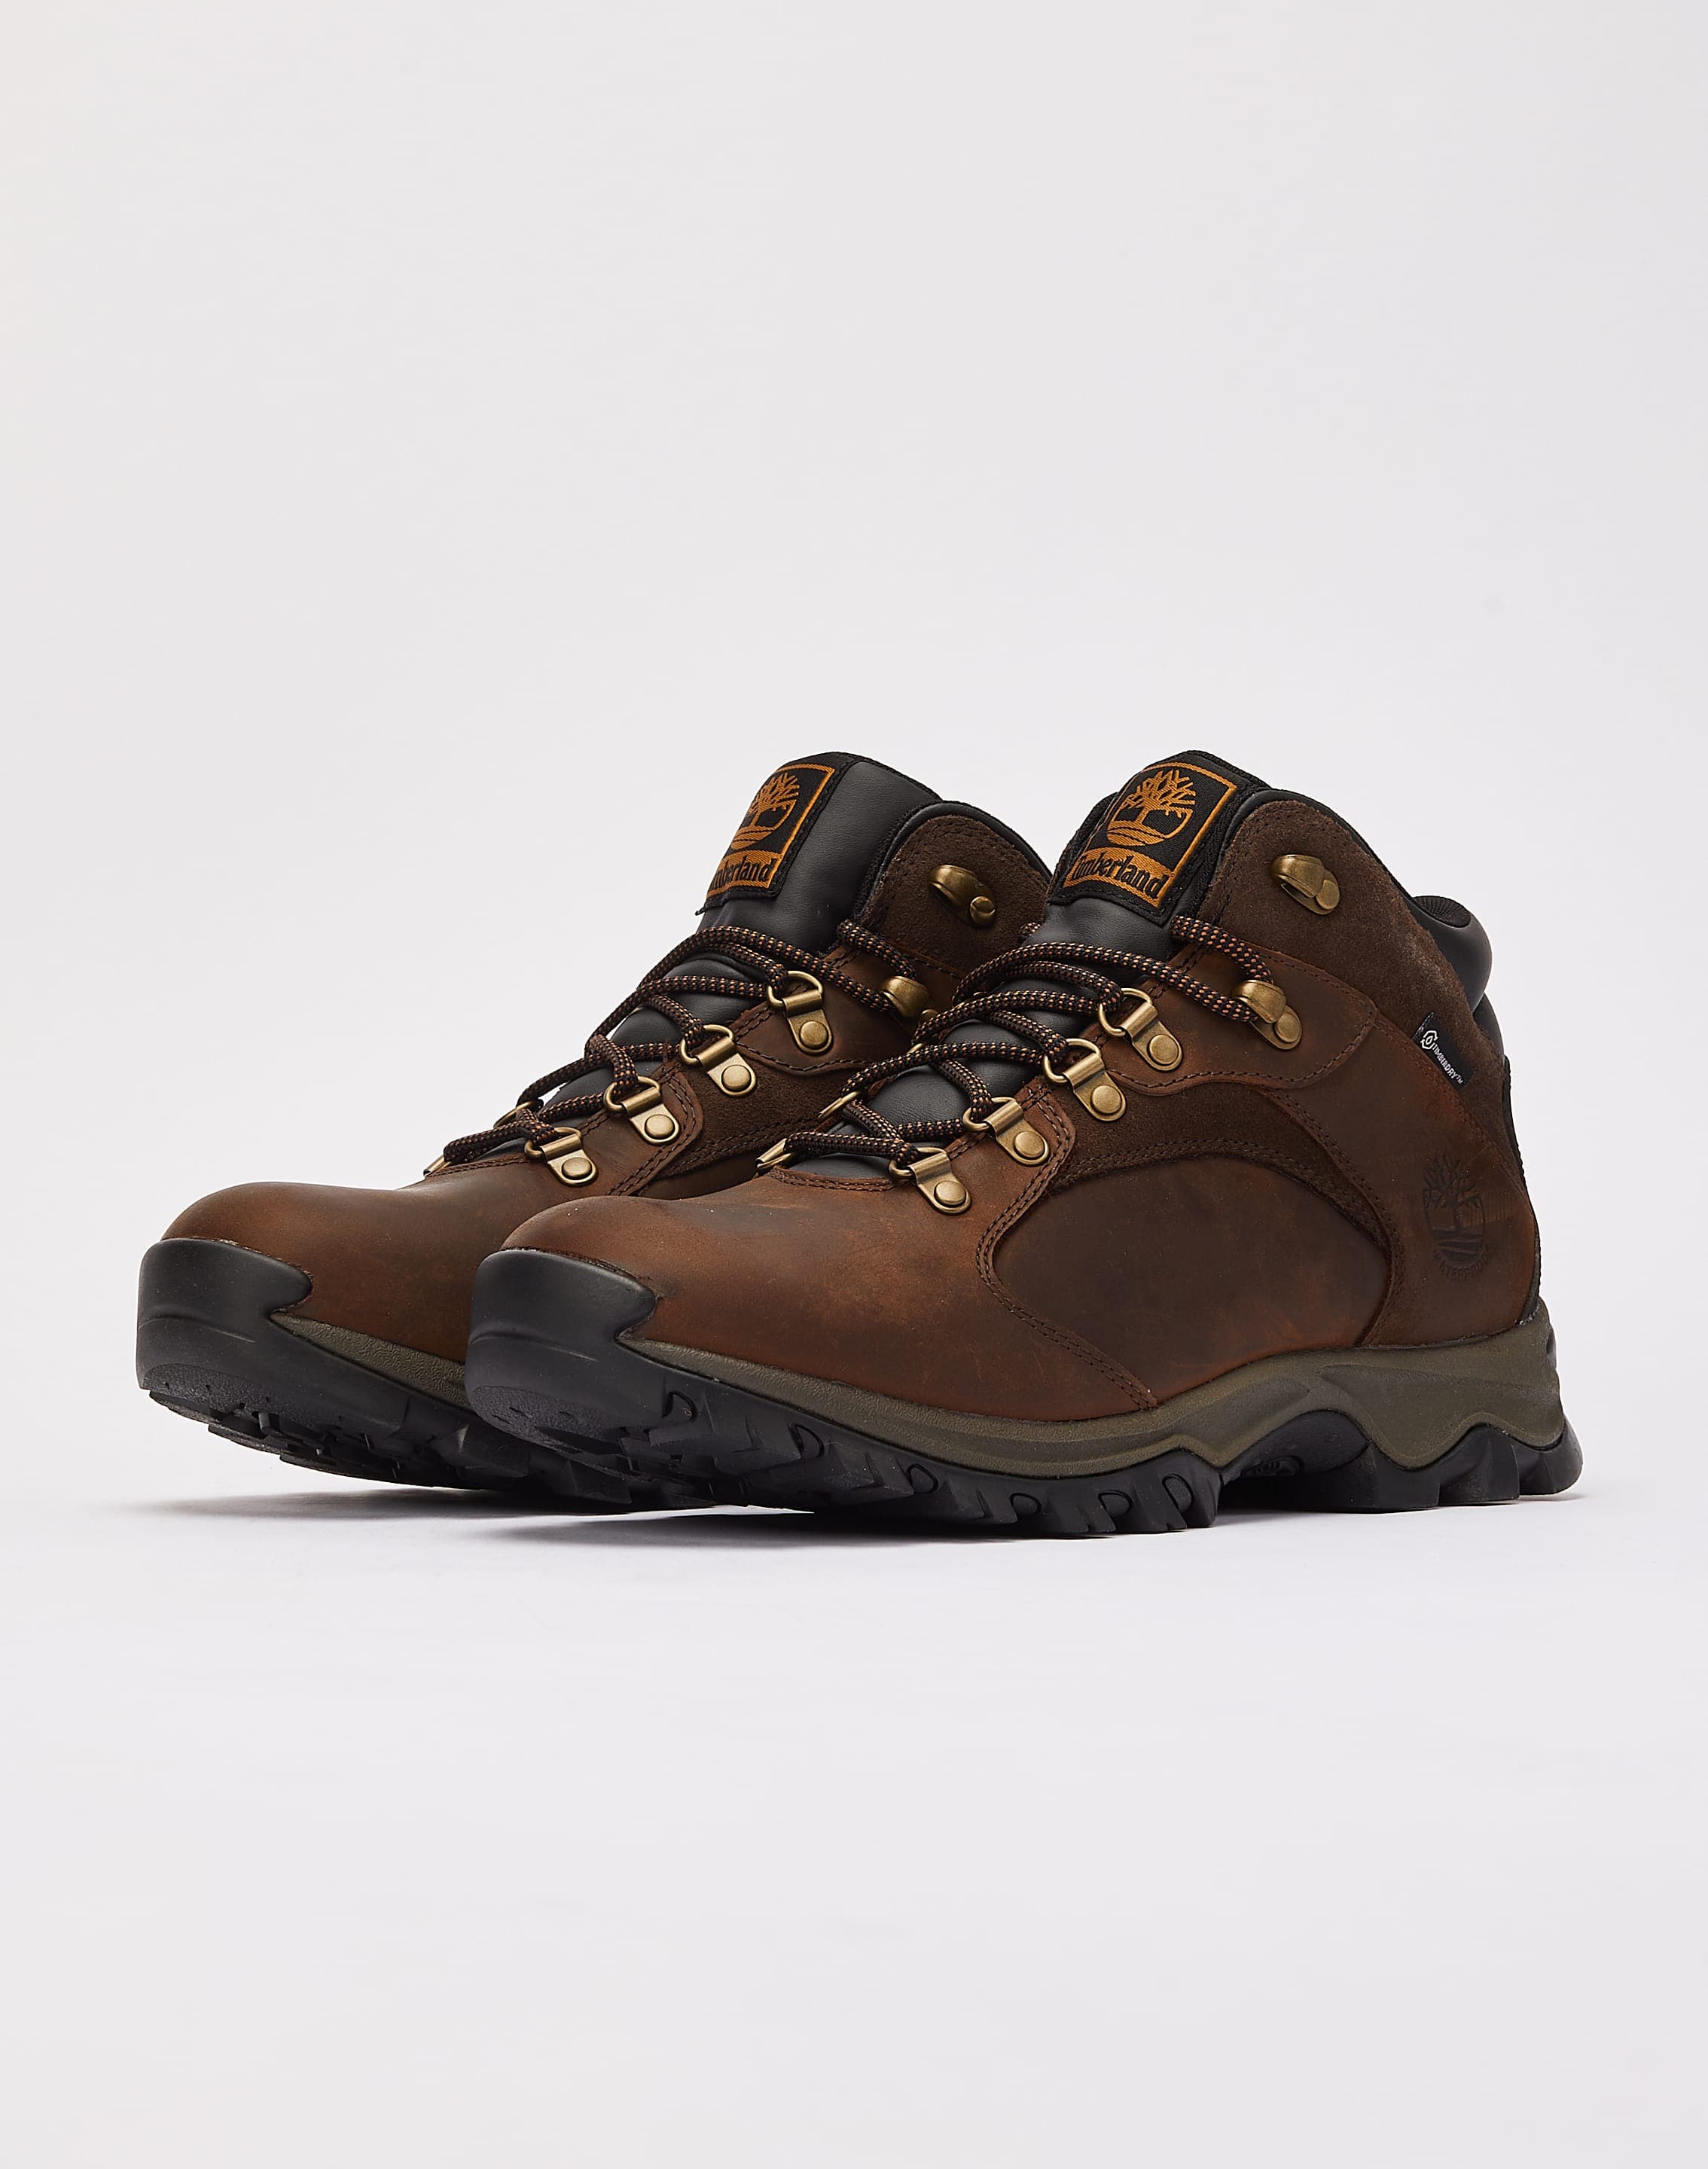 Hiking DTLR Boots Timberland Rockrimmon –